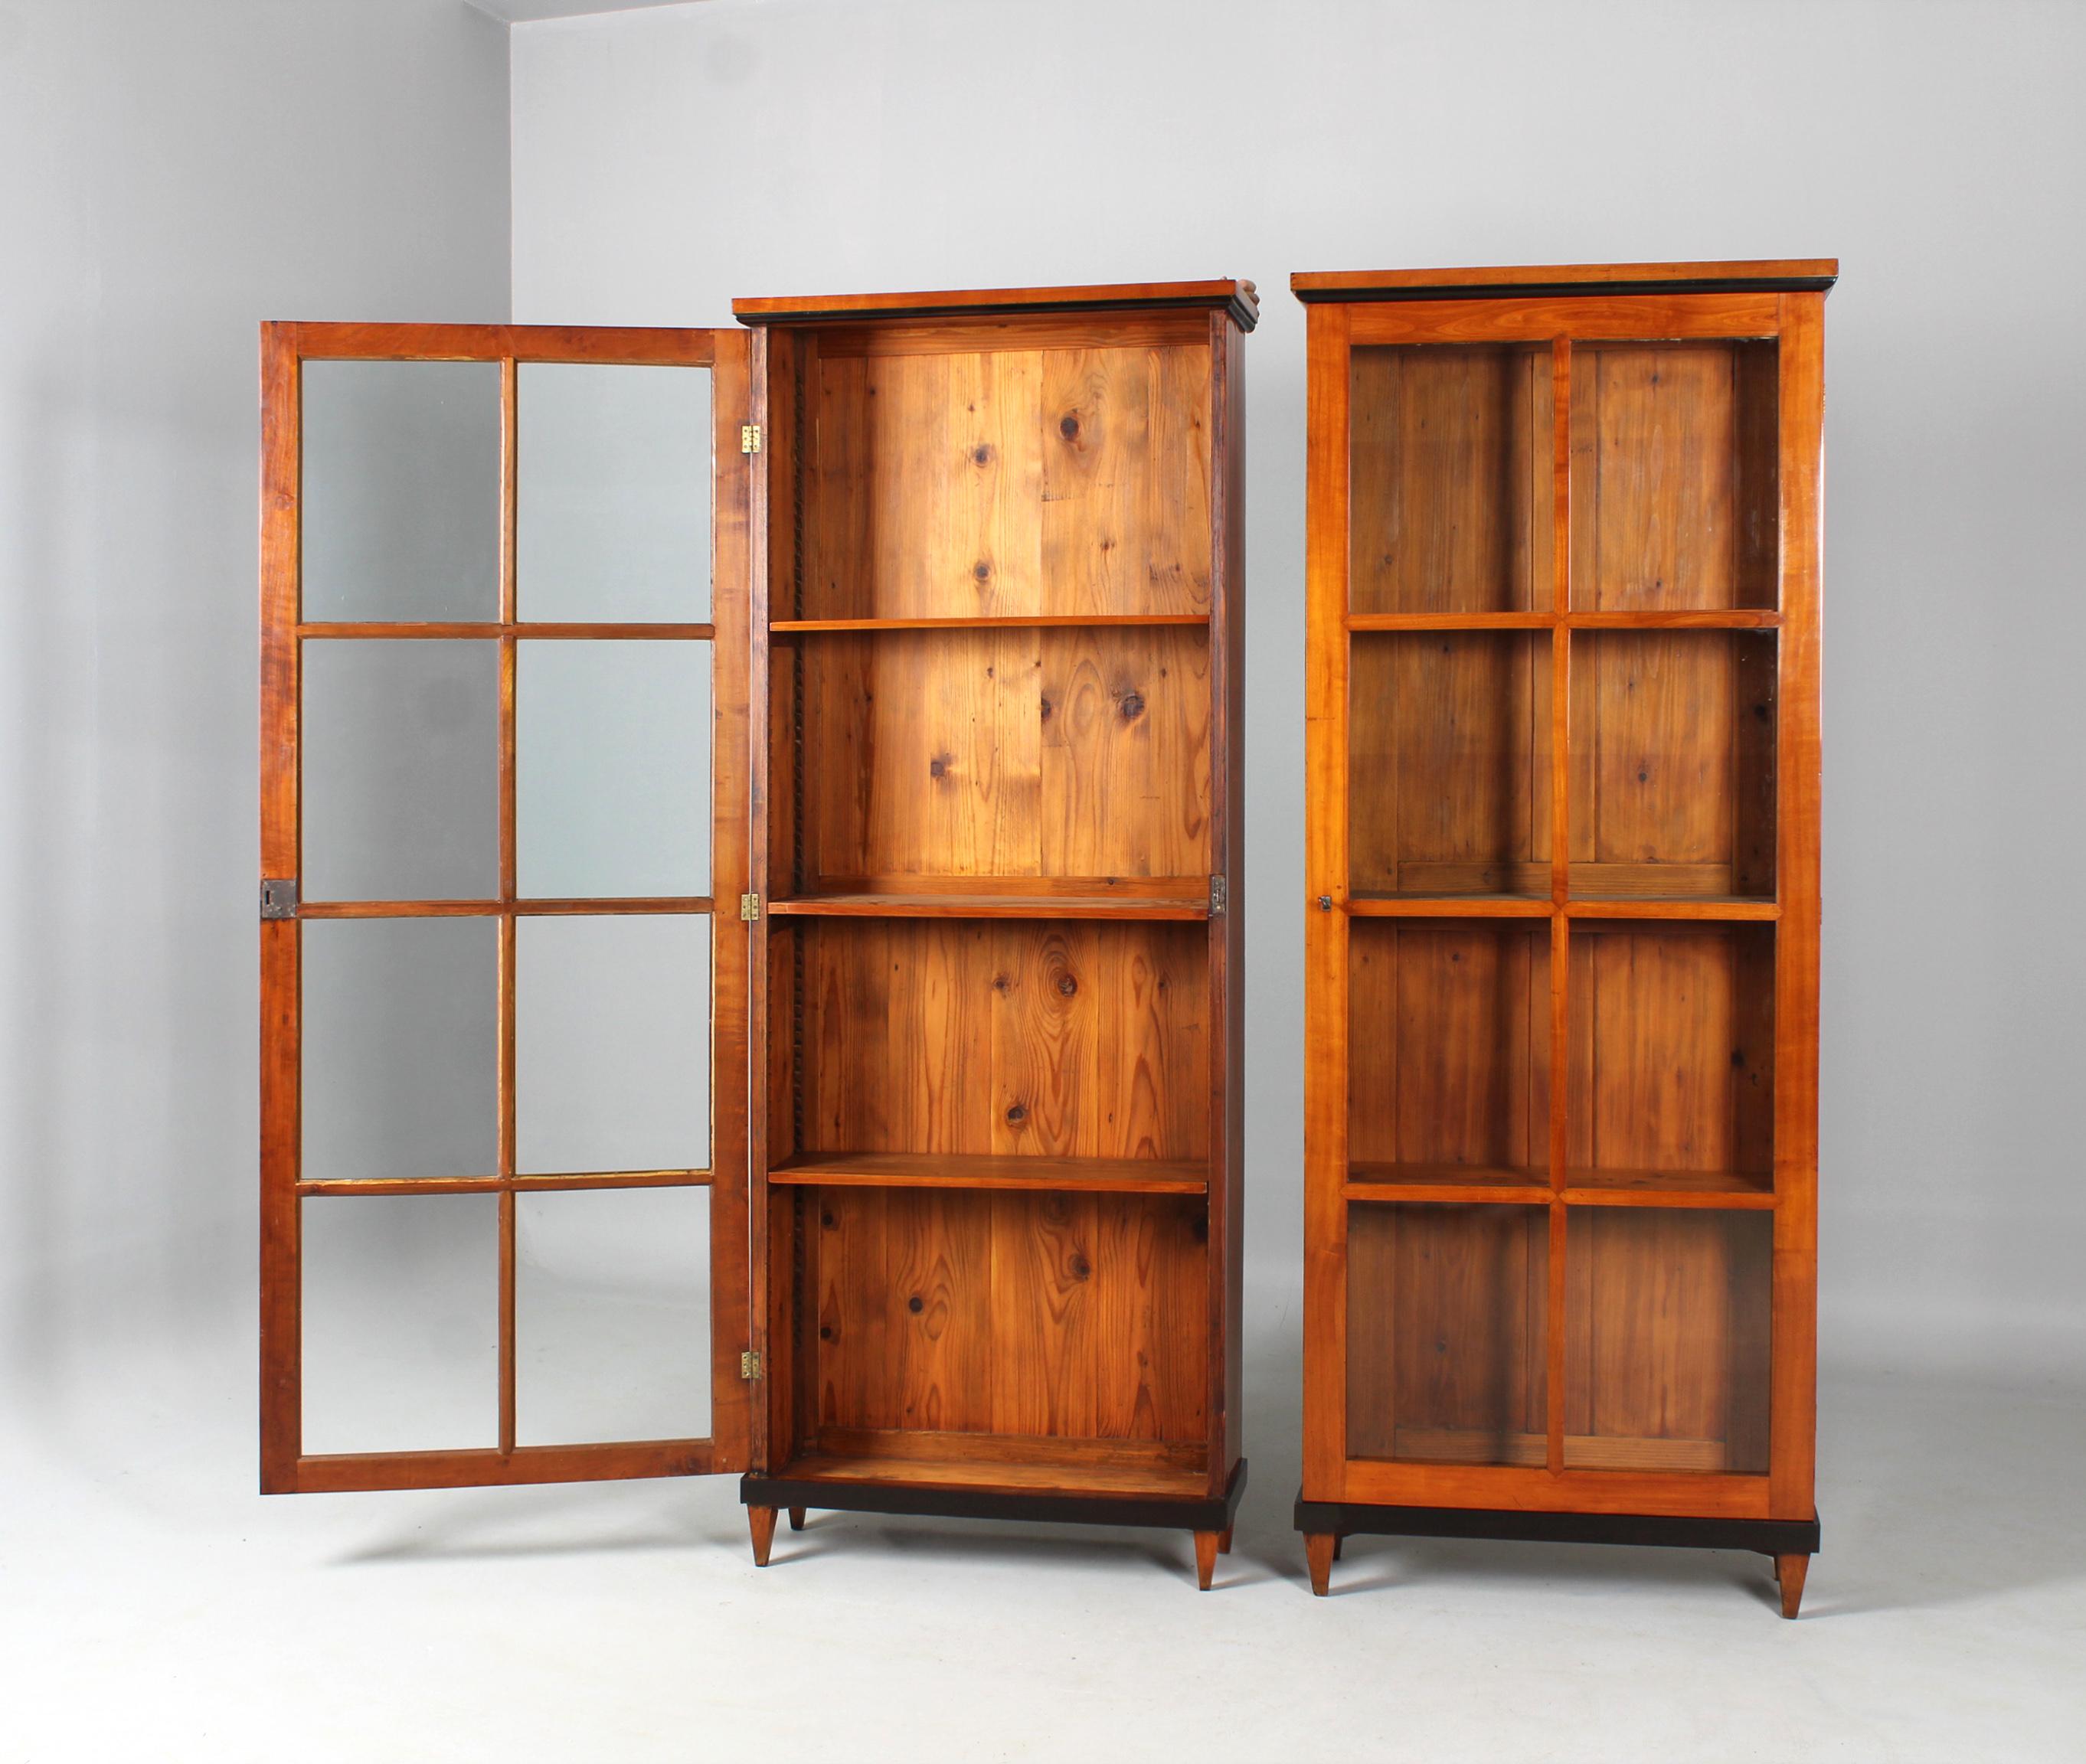 Two antique Biedermeier cherry bookcases

South Germany
Cherry tree
Biedermeier around 1820

Dimensions: H x W x D: 223 x 85 x 29 cm each

Description:
Beautiful and rare pair of two identical Biedermeier bookcases.

The strictly cubistic